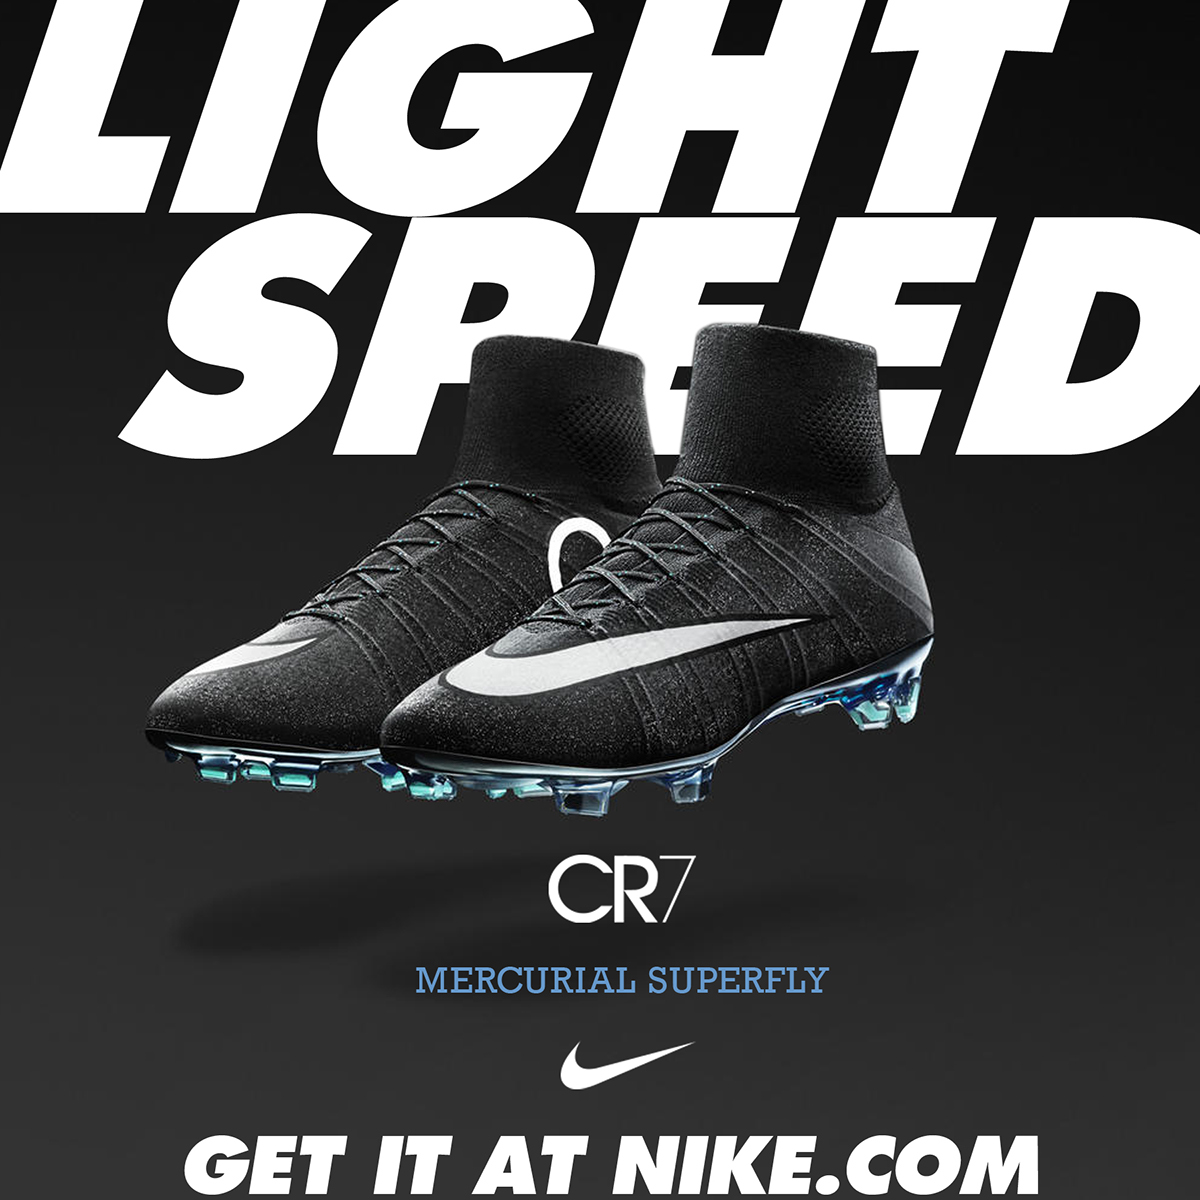 sport football Nike black ad campaign boots light speed